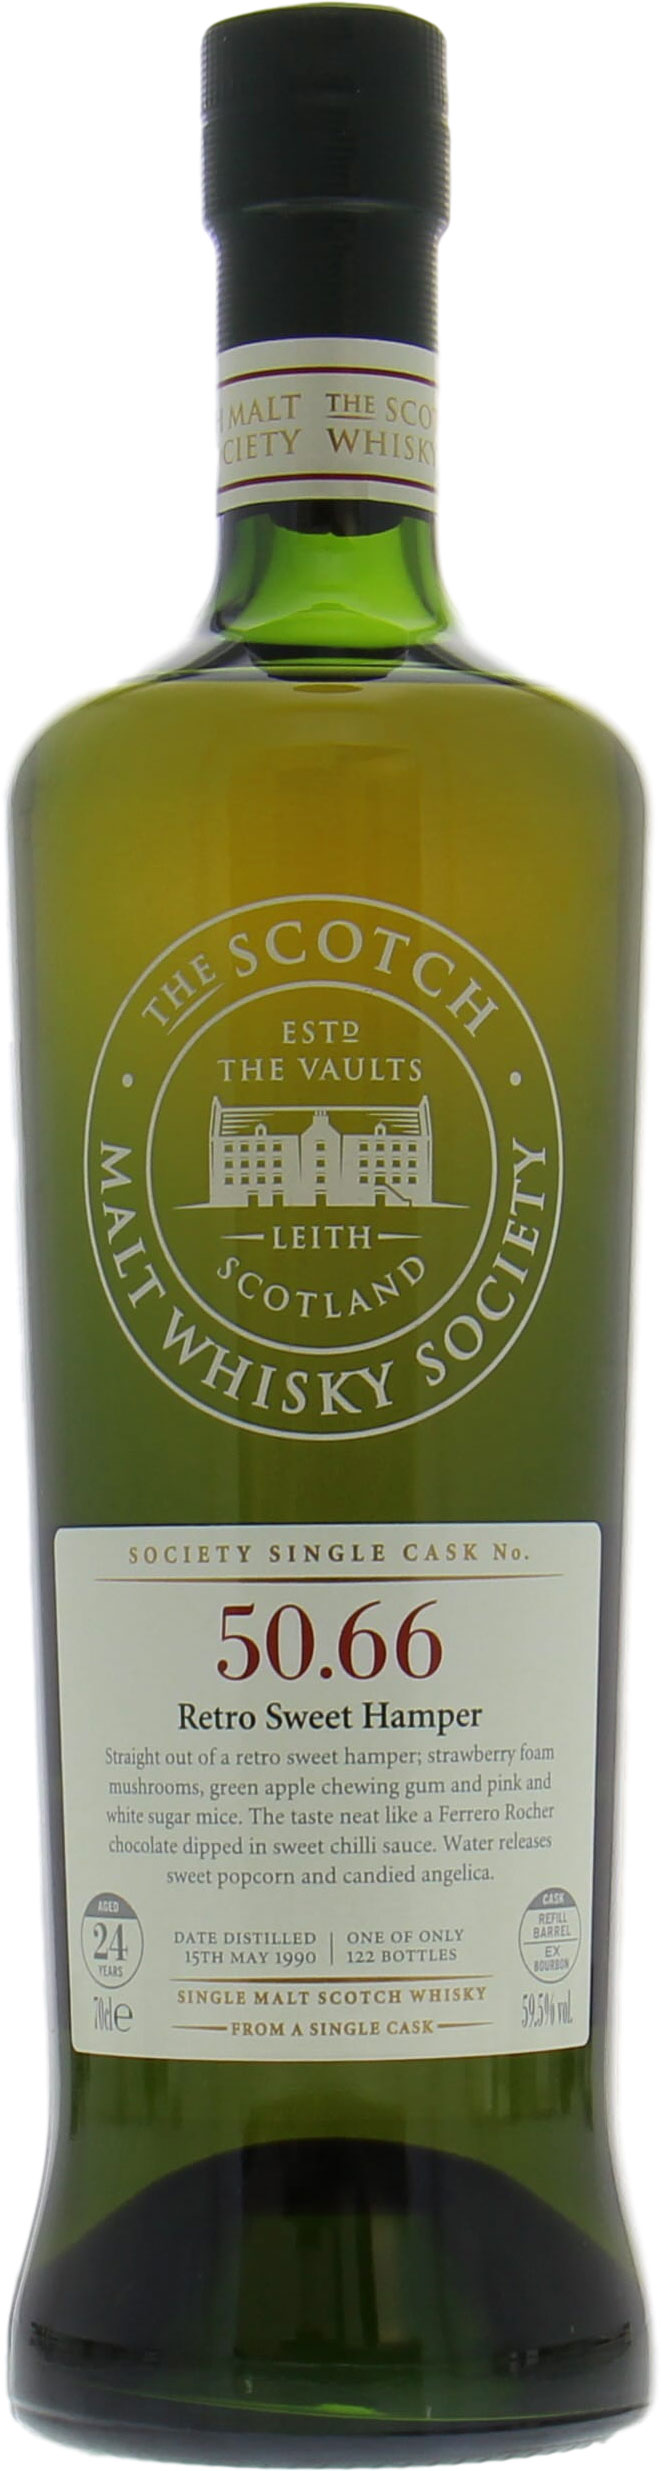 Bladnoch - 24 Years Old SMWS 50.66 Retro Sweet Hamper 59.5% 1990 Perfect